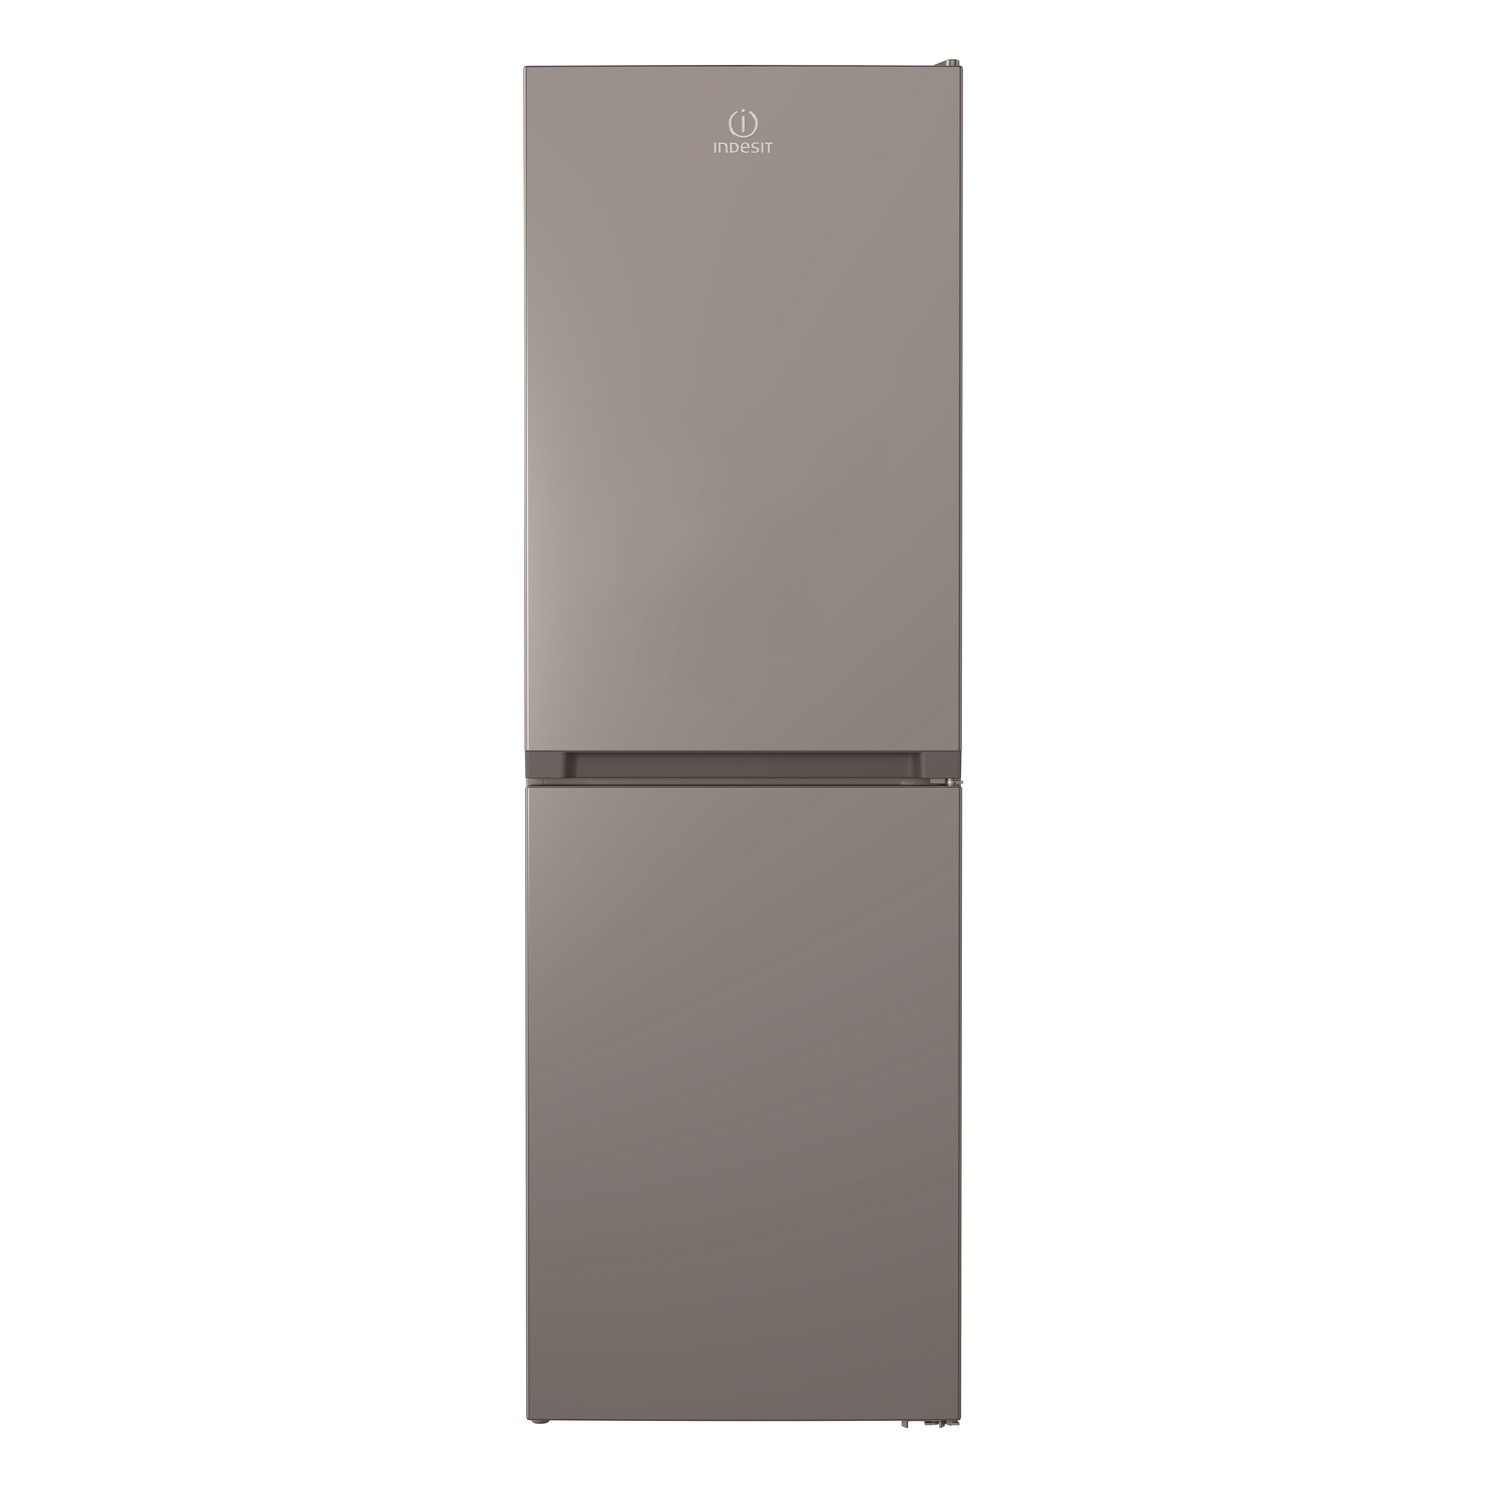 Photos - Other for Computer Indesit 322 Litre 50/50 Freestanding Fridge Freezer - Silver IBTNF60182S 